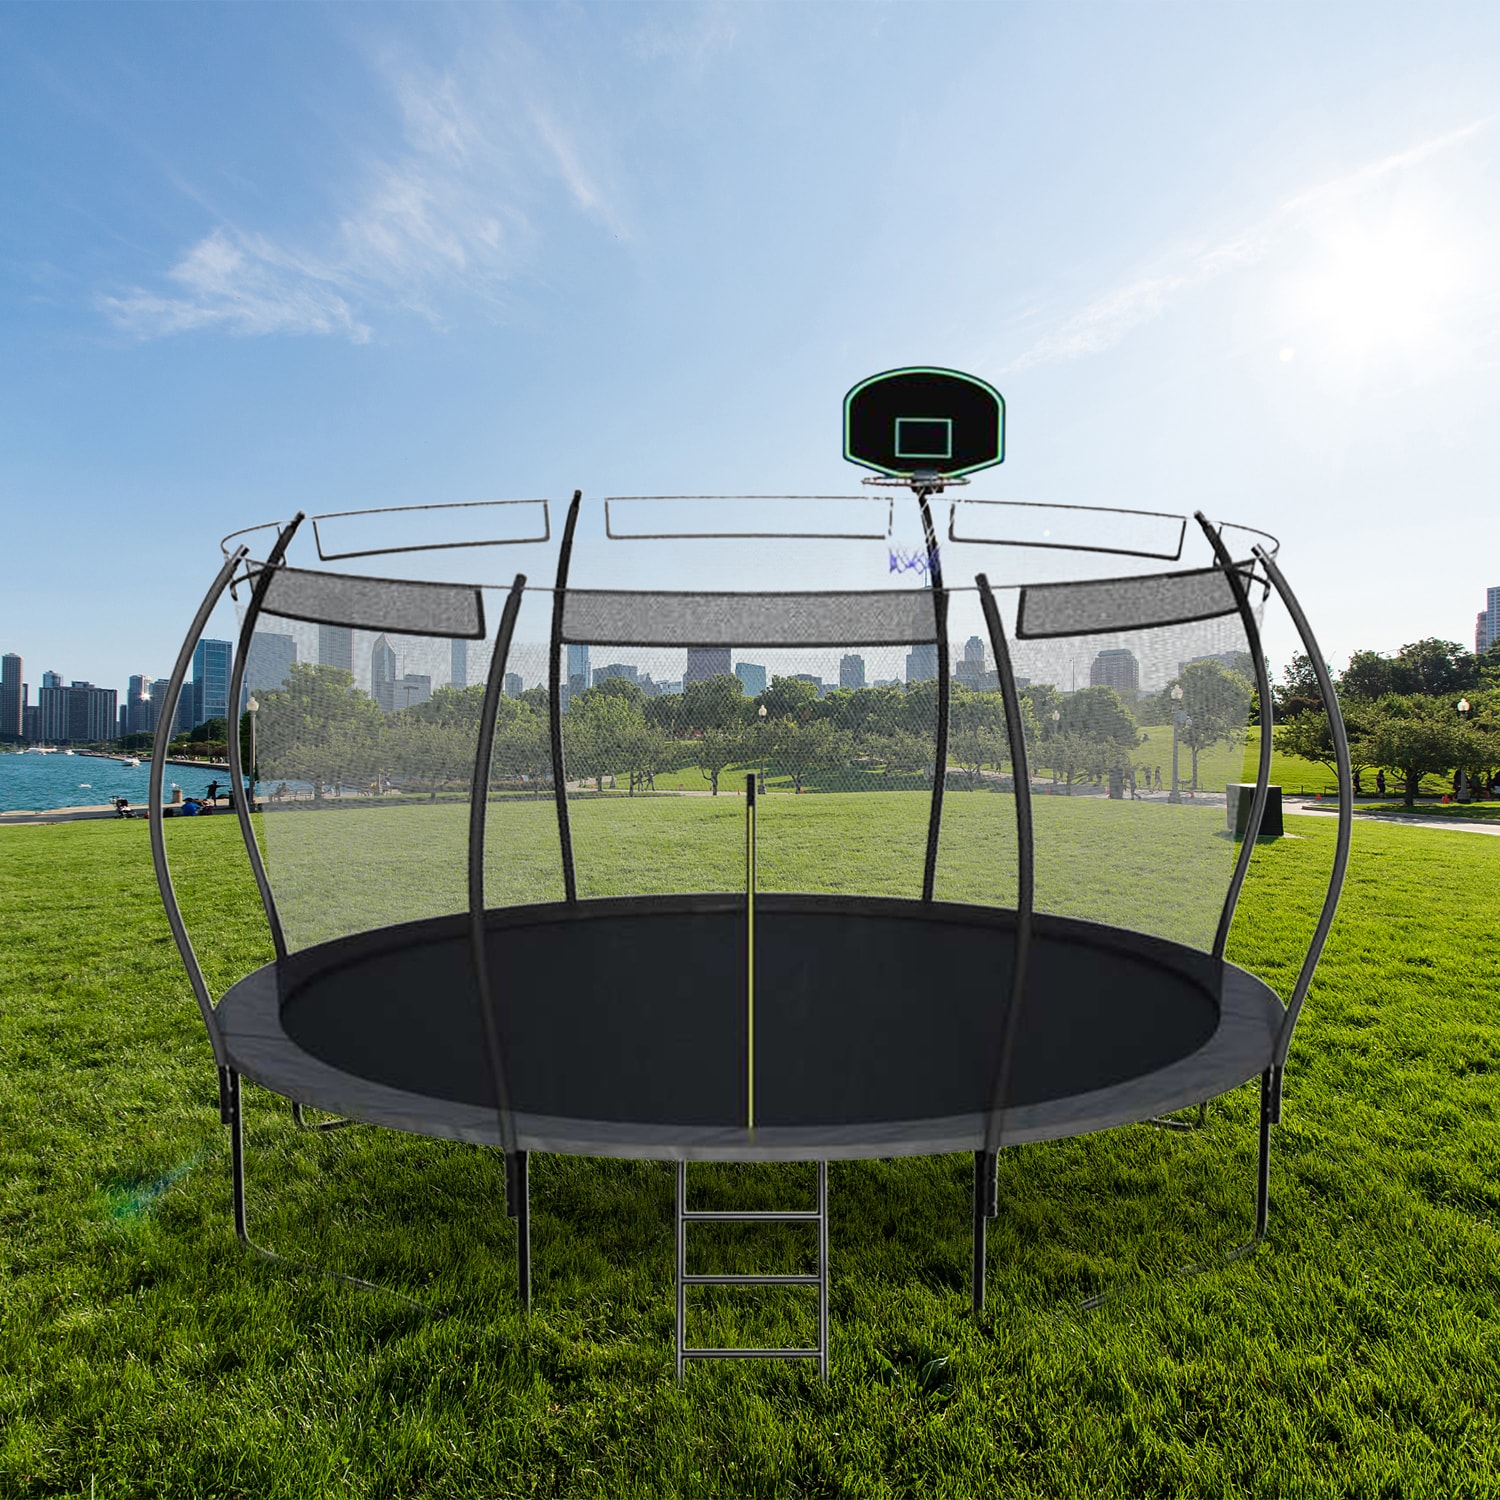 Maincraft 14FT Trampoline for Kids with Safety Enclosure Net, Ladder, Spring Cover Padding, Basketball Hoop in Trampolines department at Lowes.com